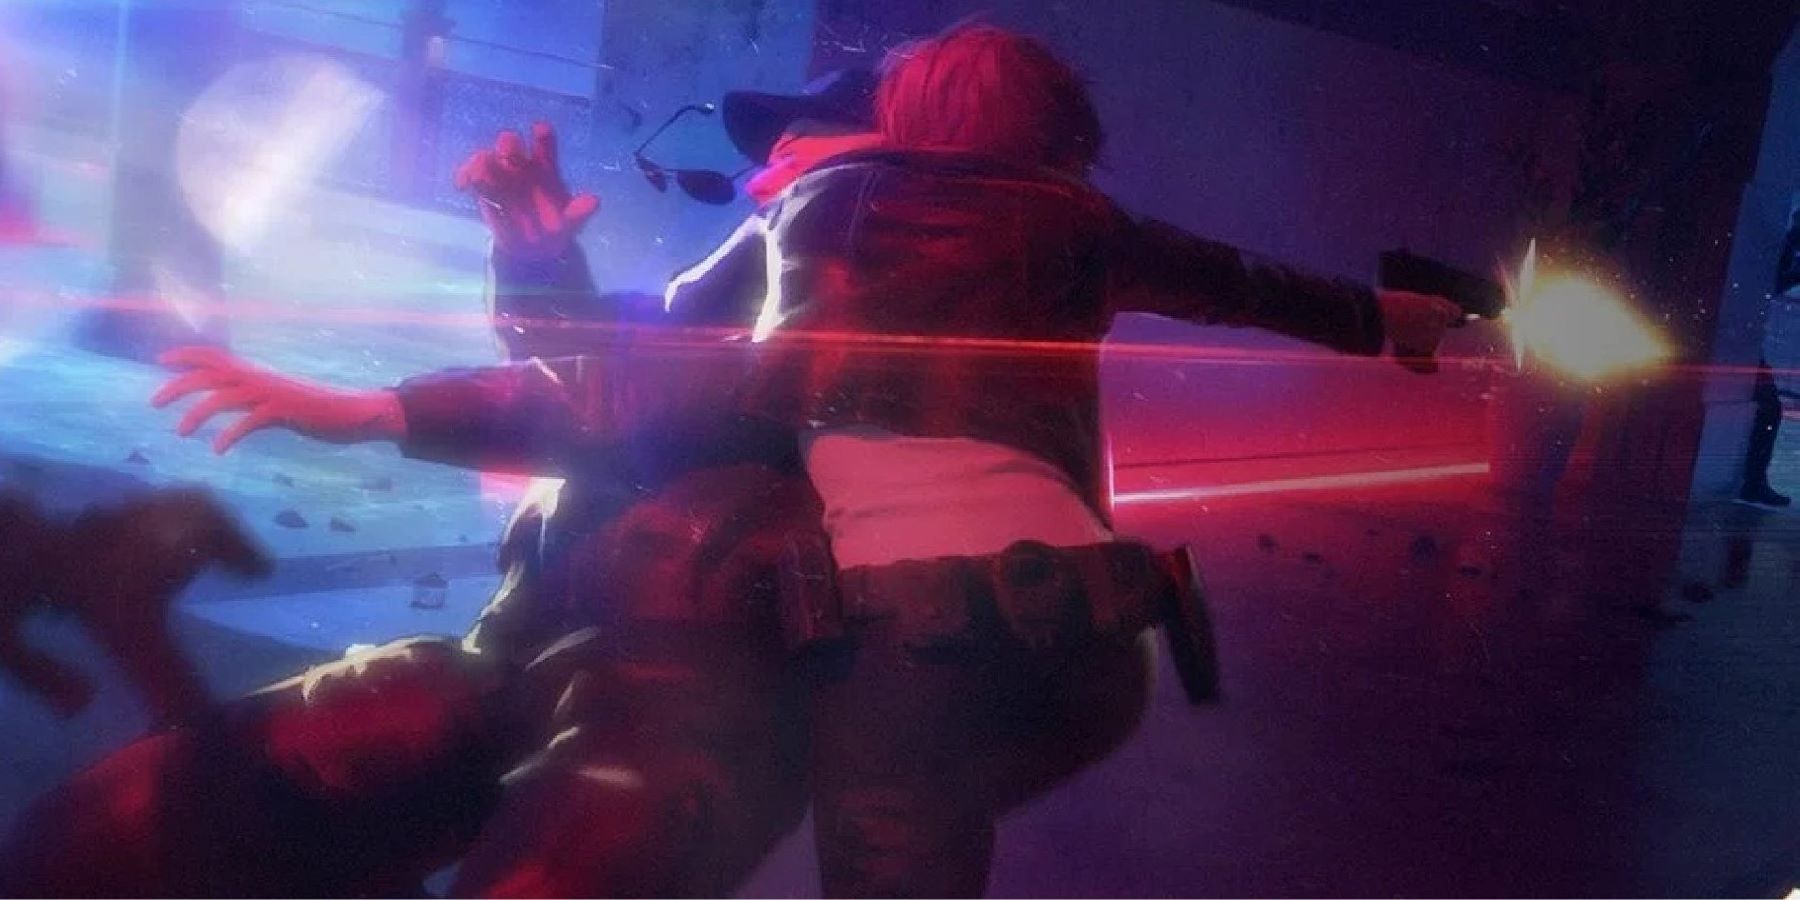 Joanna Dark grappling a guard and firing a pistol in art for the Perfect Dark remake